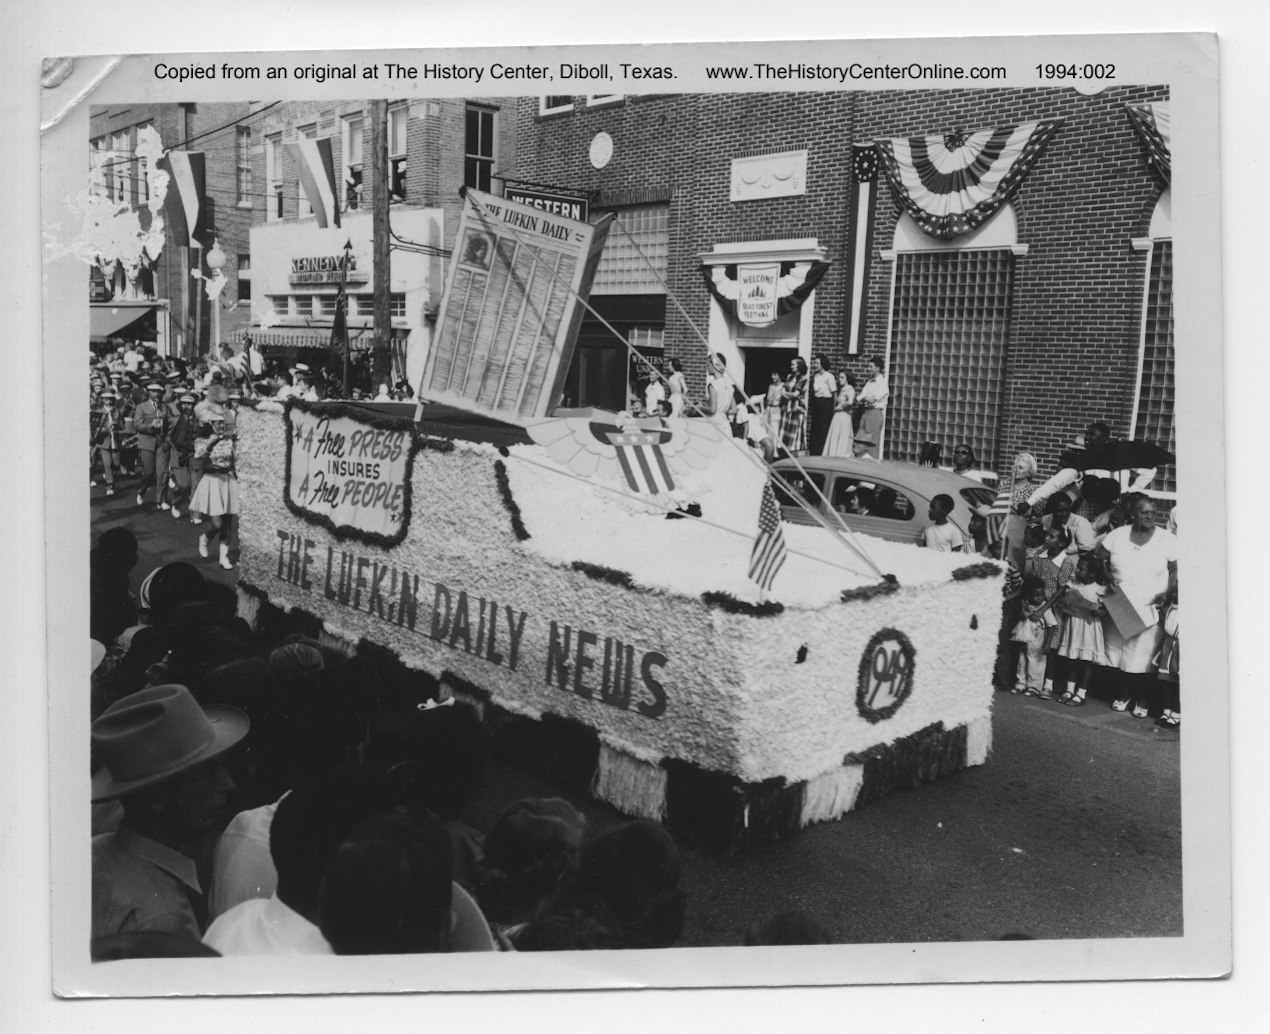 Lufkin Daily News Float, Forest Festival 1949 The History Center